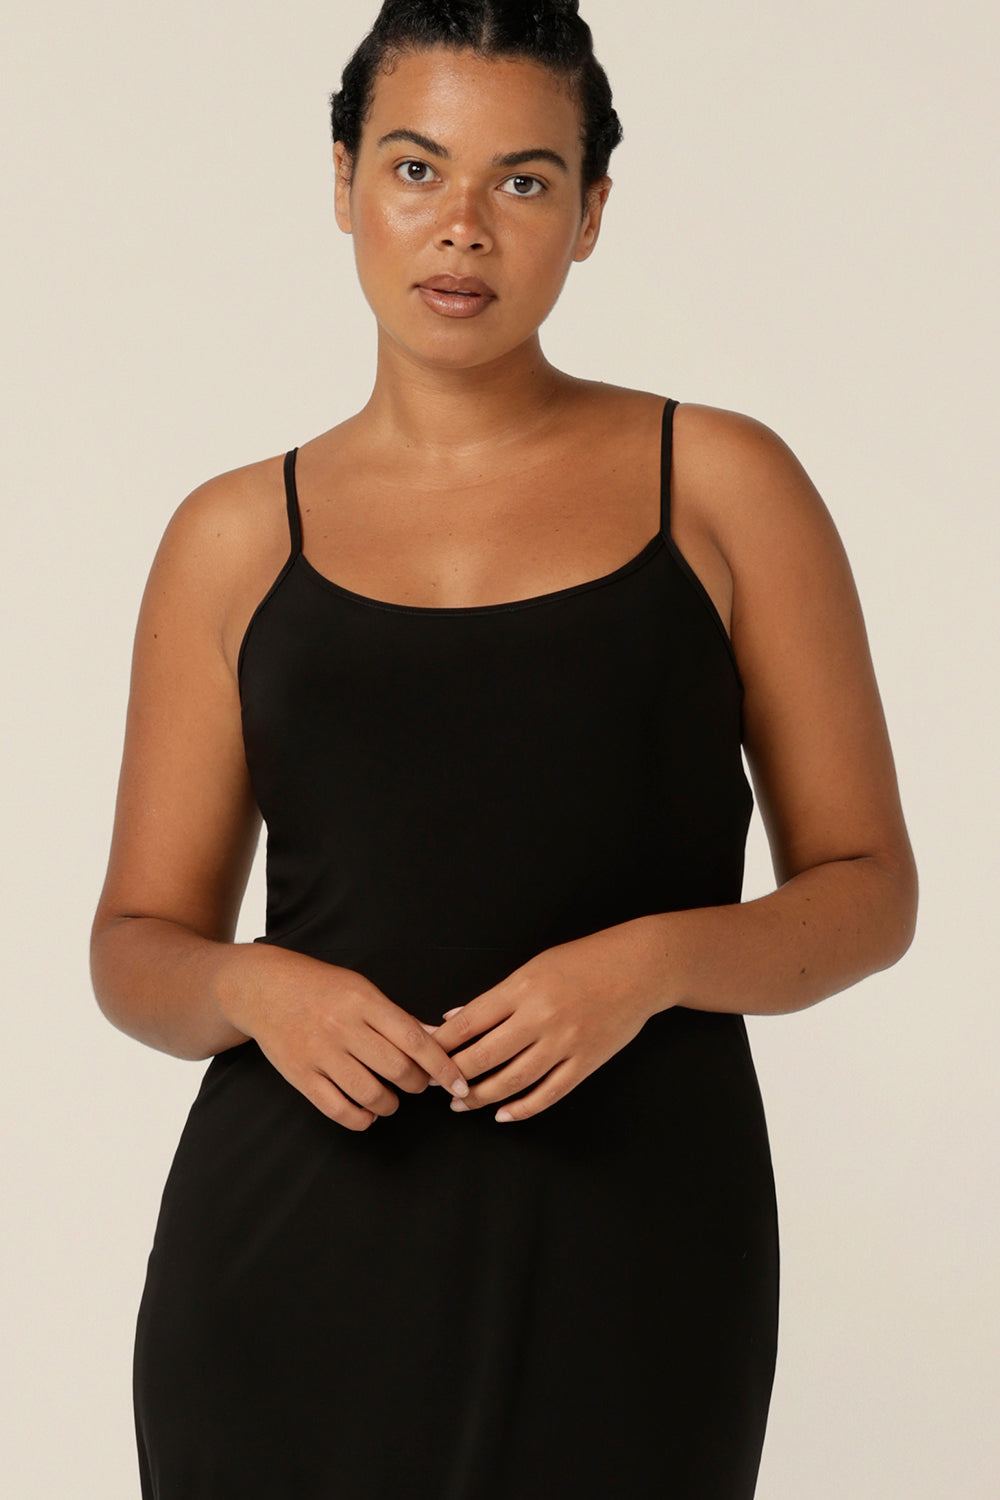 Plus size lounge wear - plus size slip dress - plus size strap dress -Close up of a scoop neckline on a reversible black slip in size 12.  The calf-length slip is made in Australia and layers under dresses and separates. The black slip has thin straps and is worn with a scoop neck to the front.